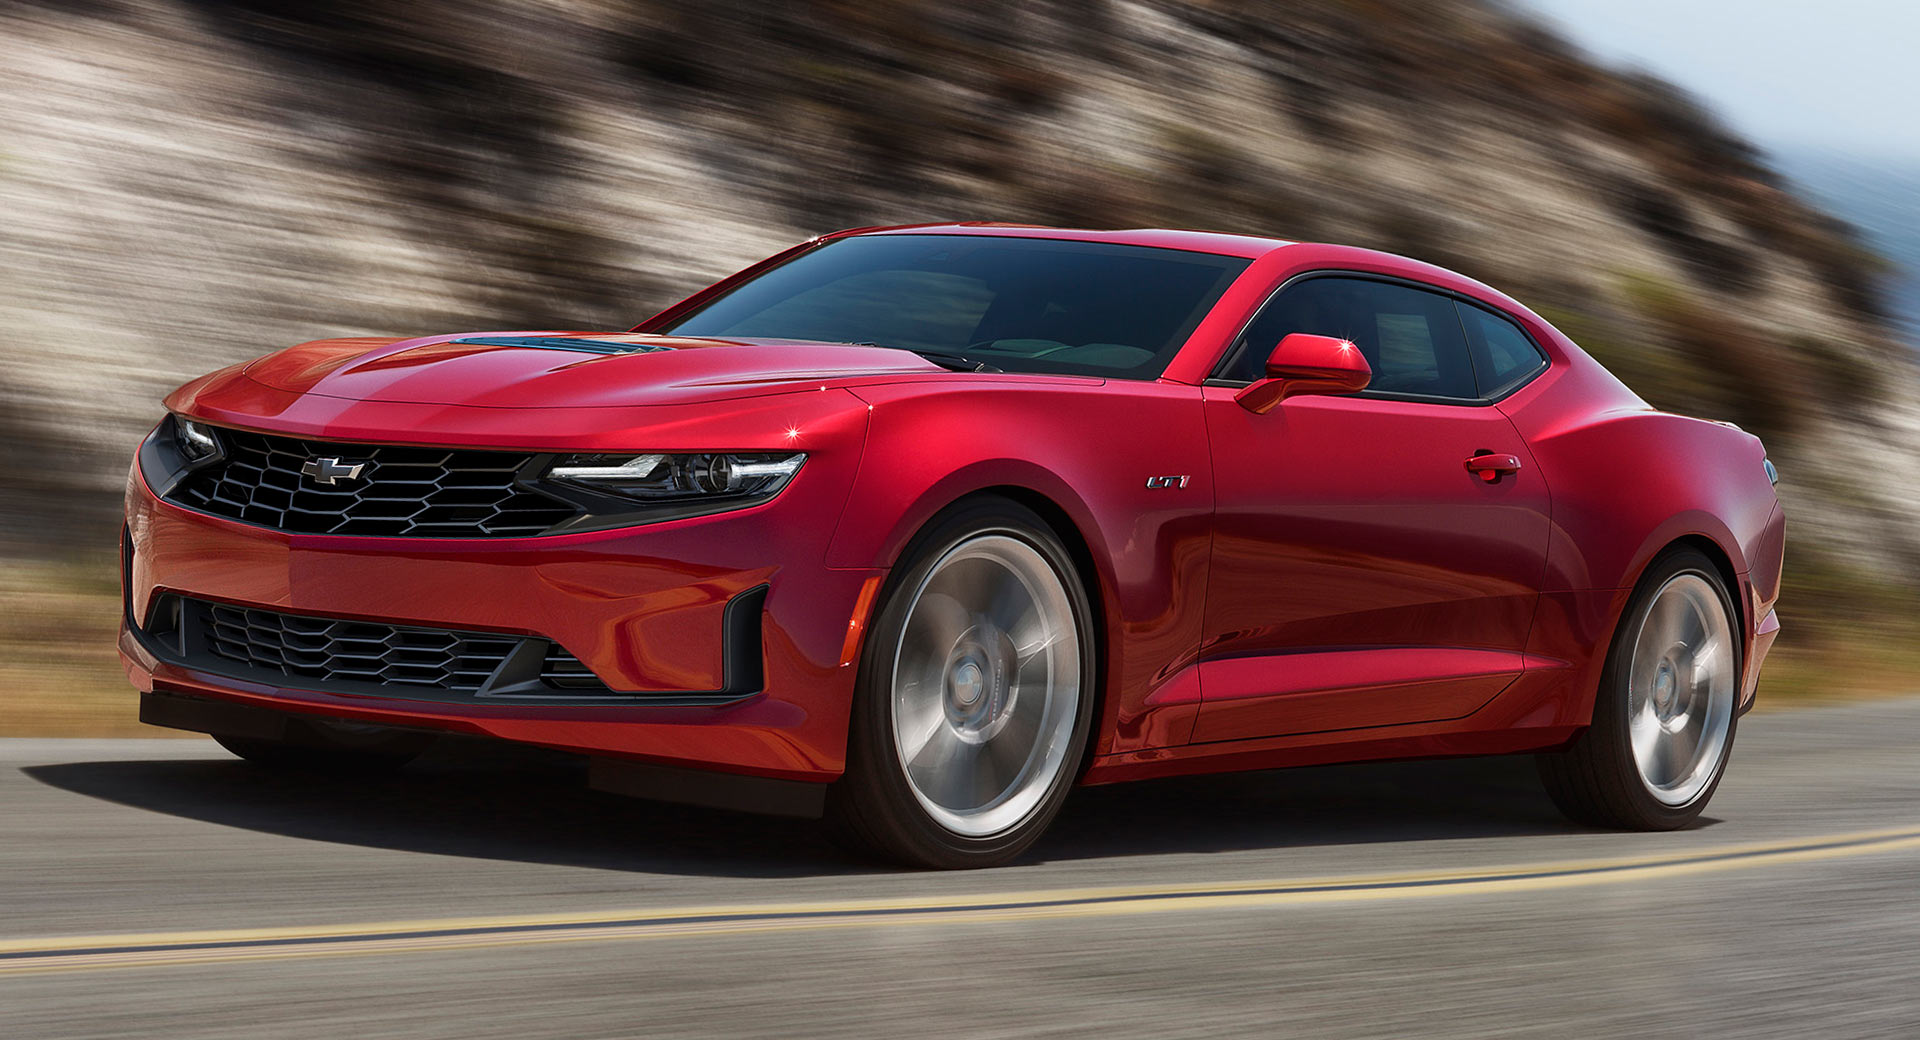 2021 Chevrolet Camaro Getting Minor Updates, Here's What To Expect ...